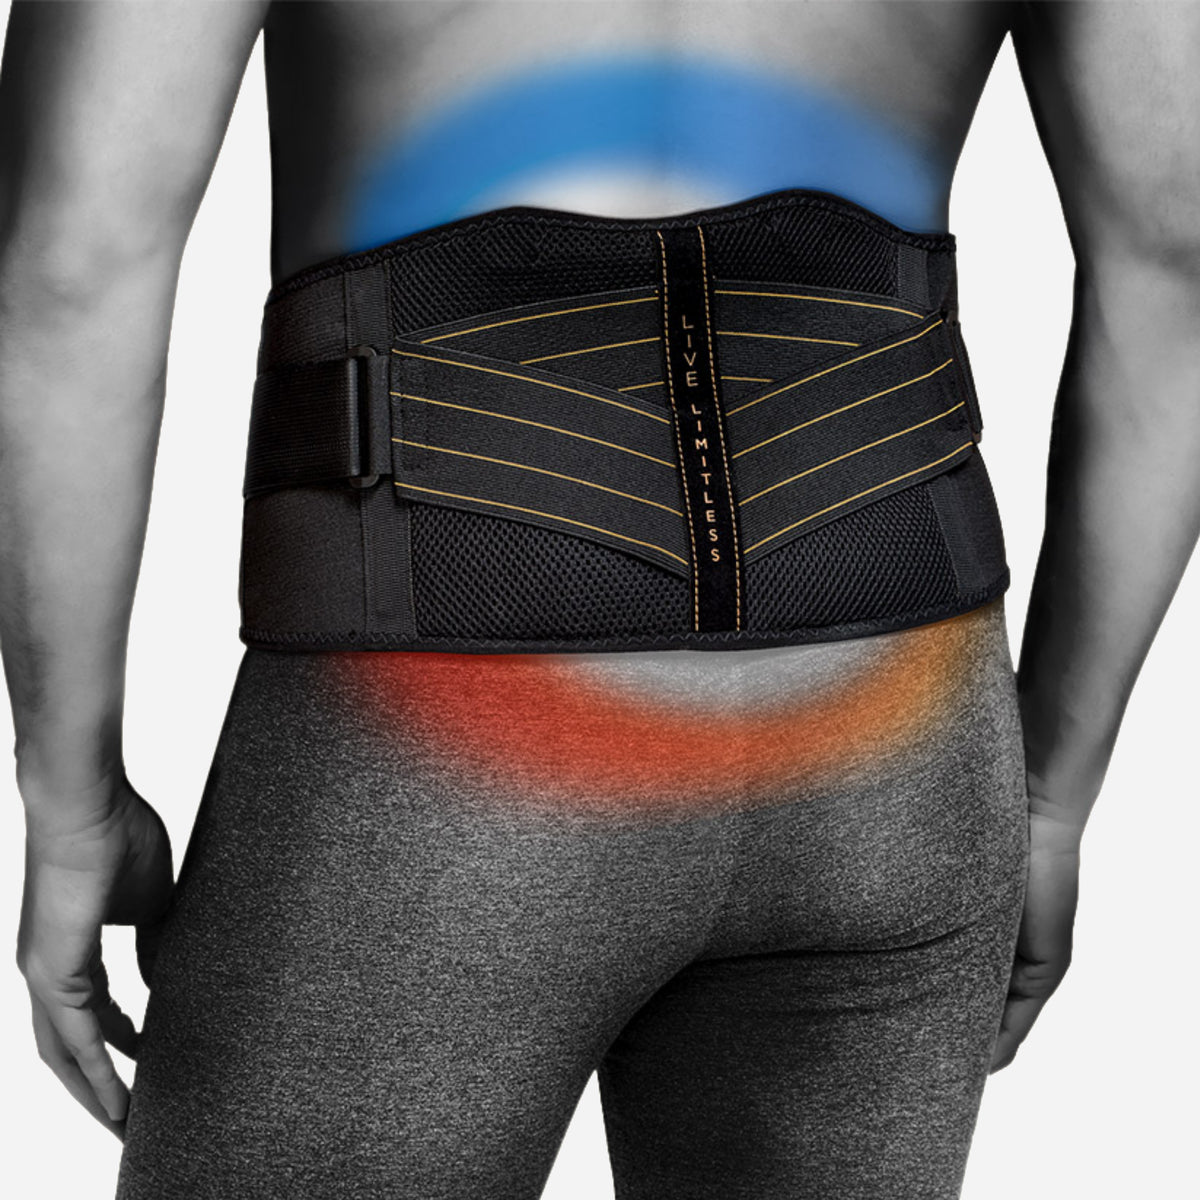 Other Health & Beauty - Copper Fit Rapid Relief Back Support Brace